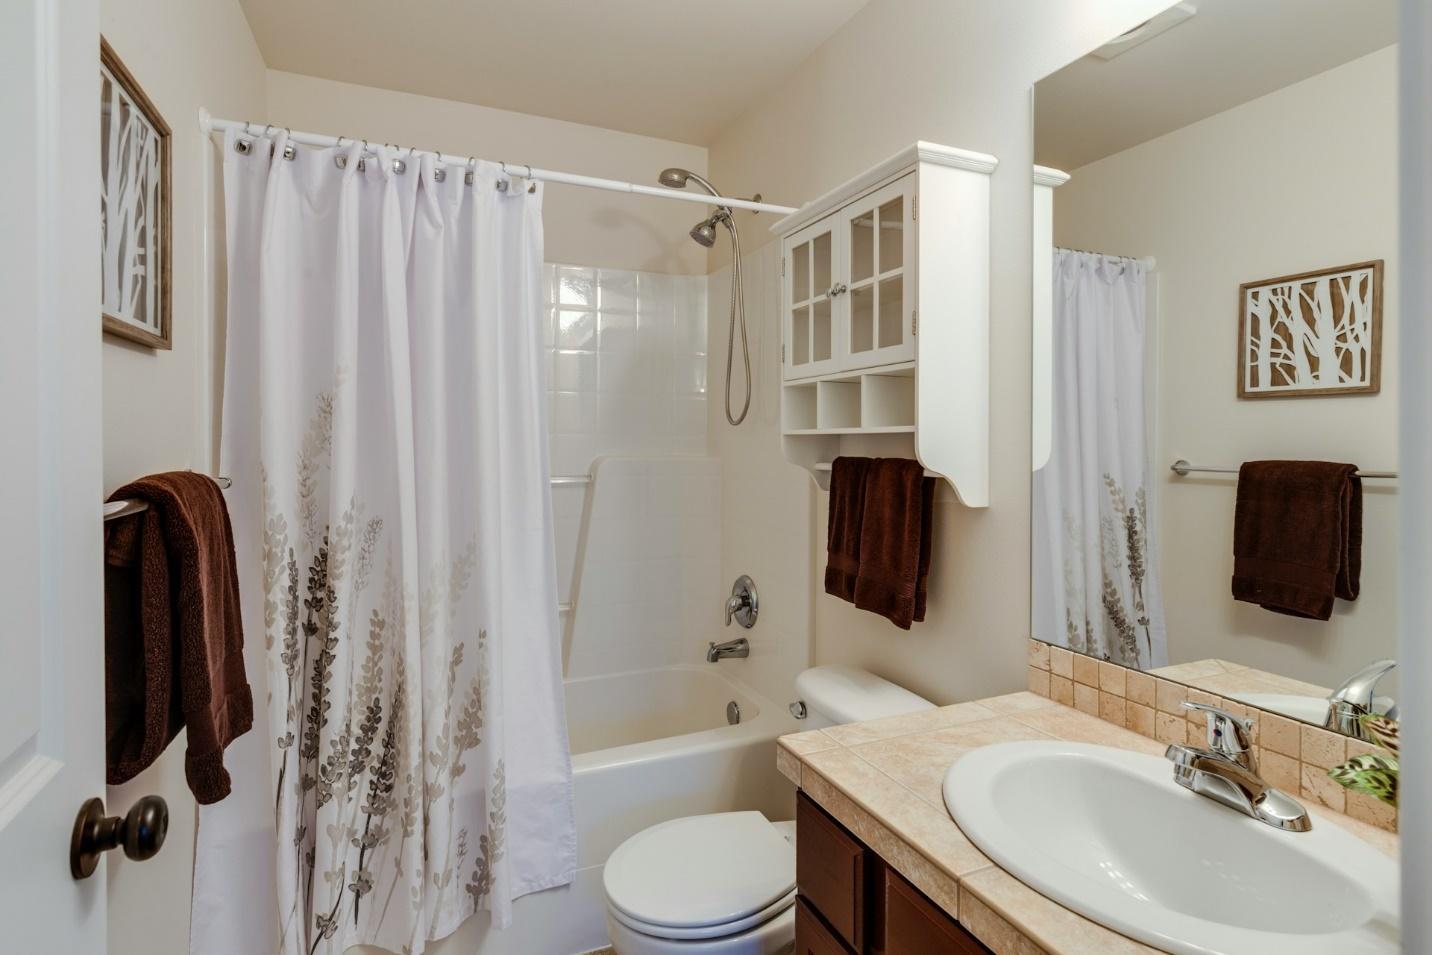 A room with lots of trendy bathroom storage hacks included.